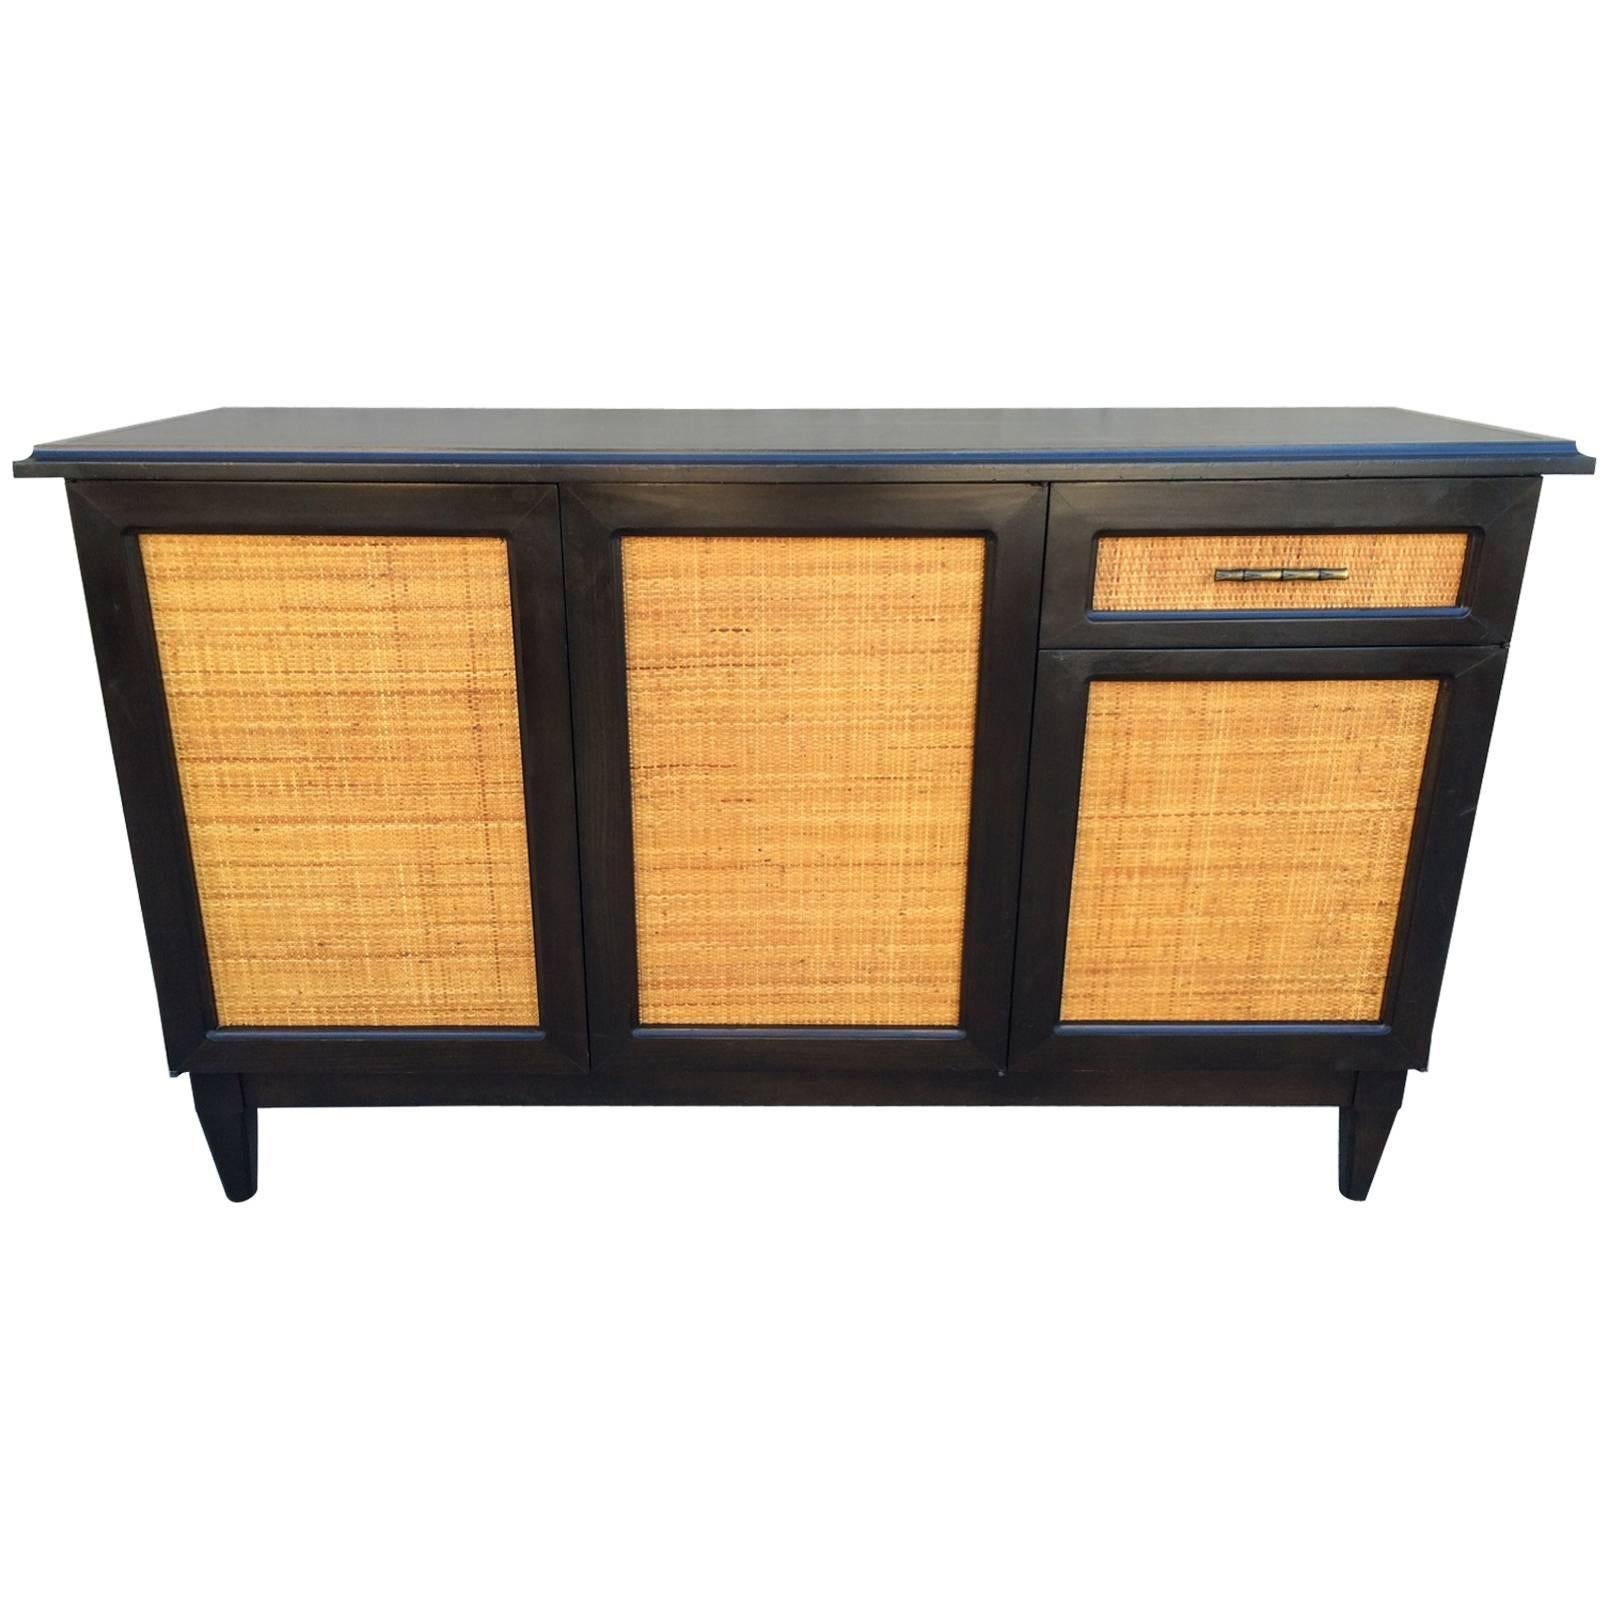 Light Color Cane and Dark Walnut Credenza in the Manner of Edward Wormley